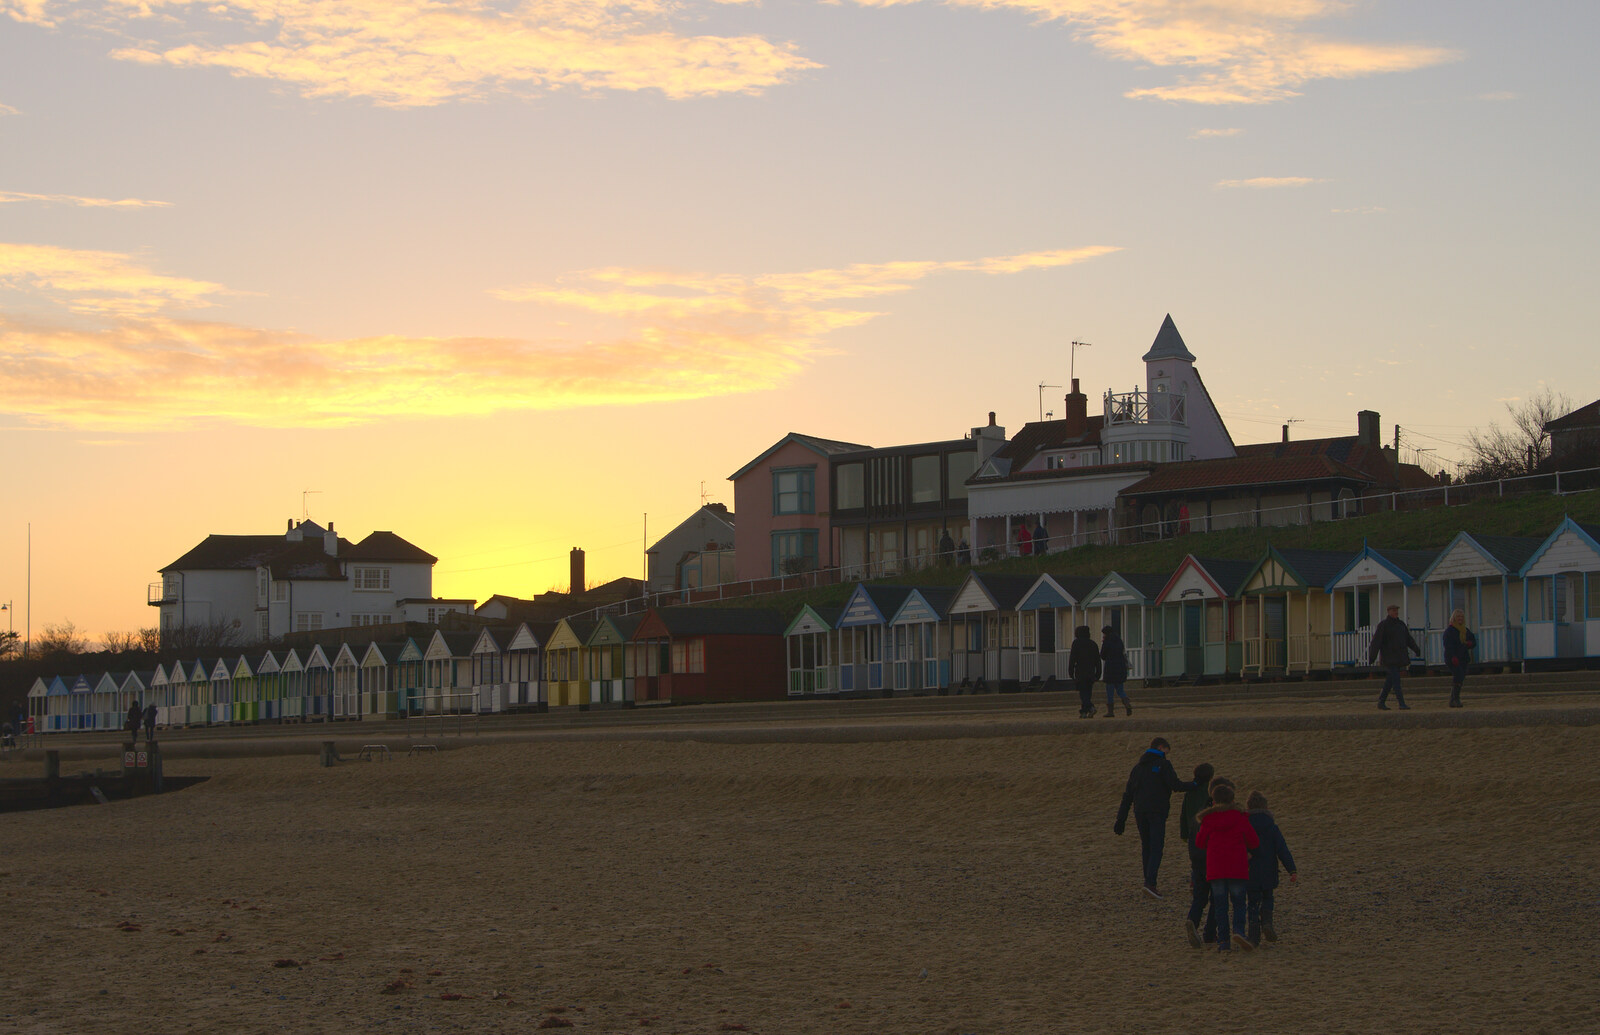 The sun sets over Southwold from Sunset on the Beach, Southwold, Suffolk - 30th December 2014